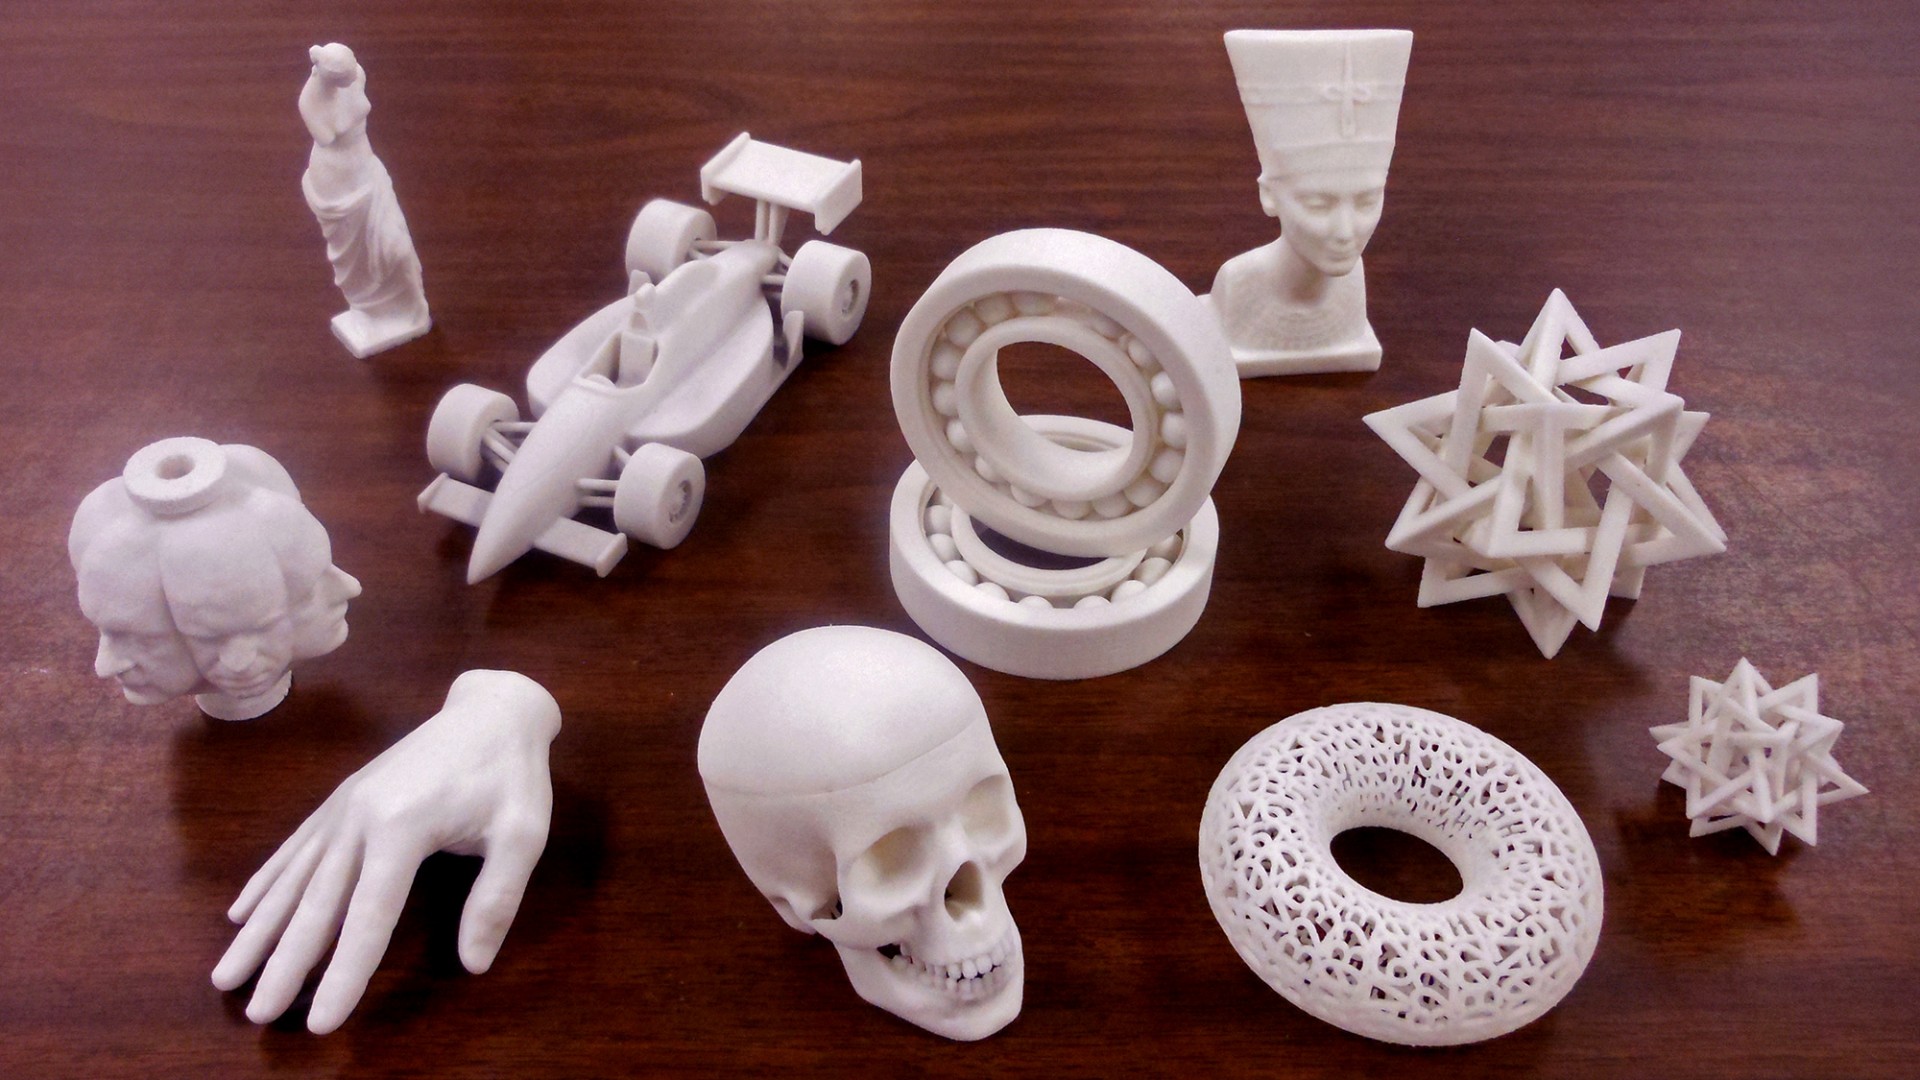 The best resources with free 3D models for printing